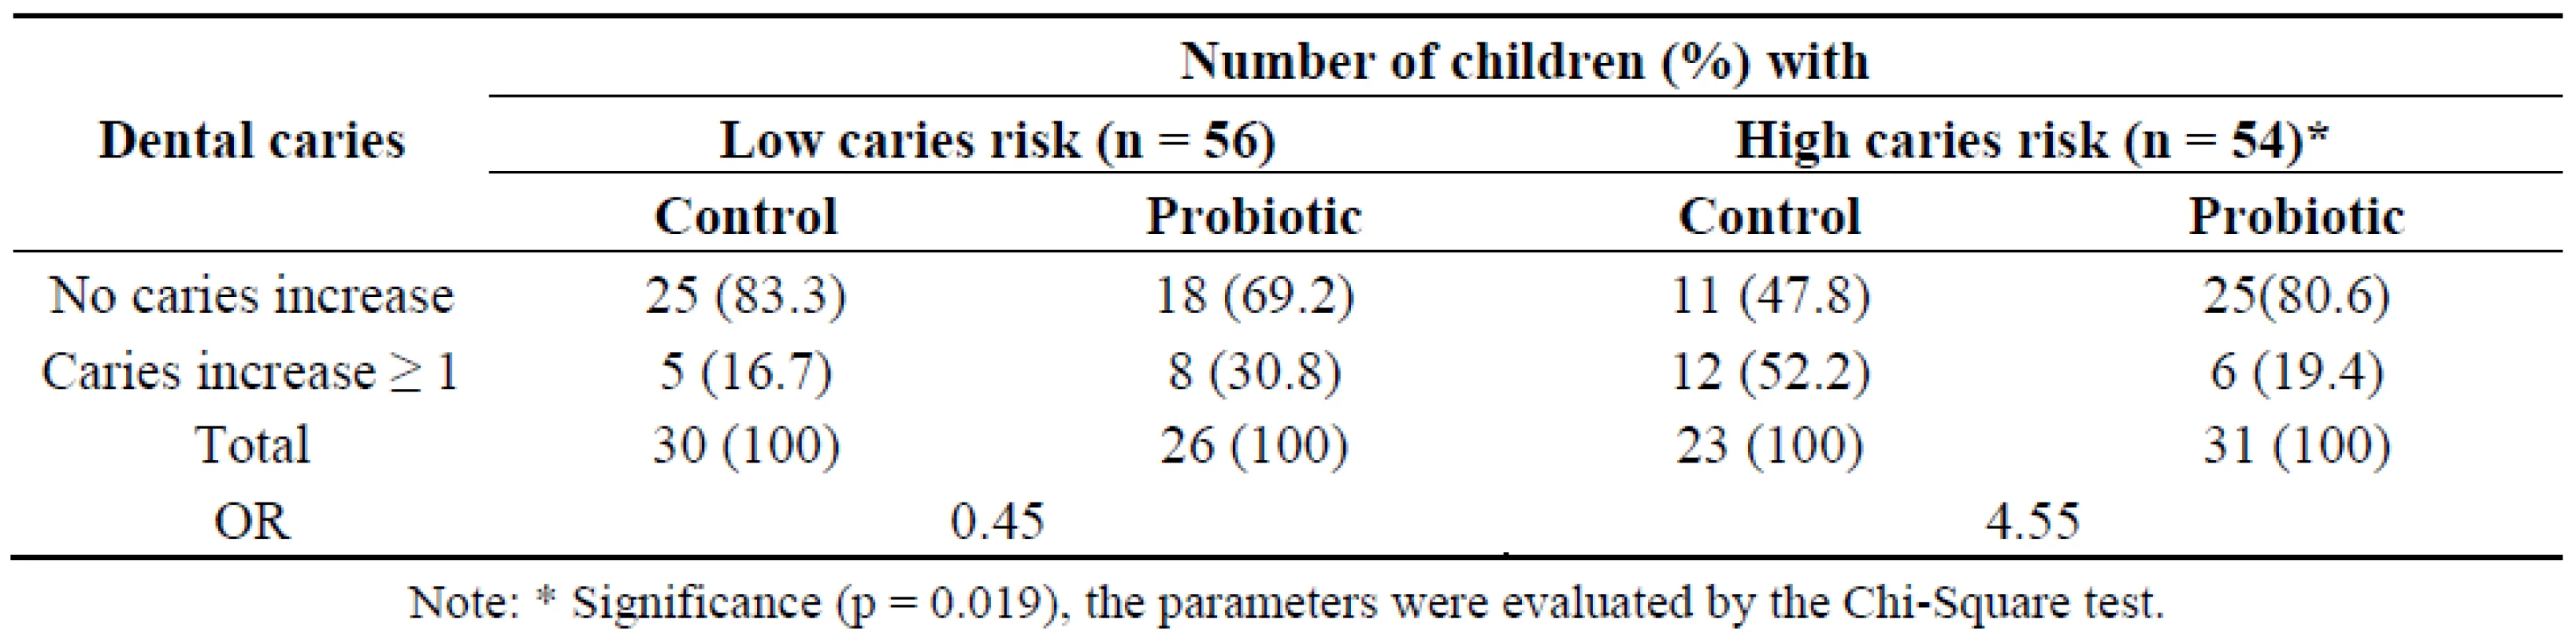 Number of children with caries increments of the control and probiotic groups with low and high caries risk.